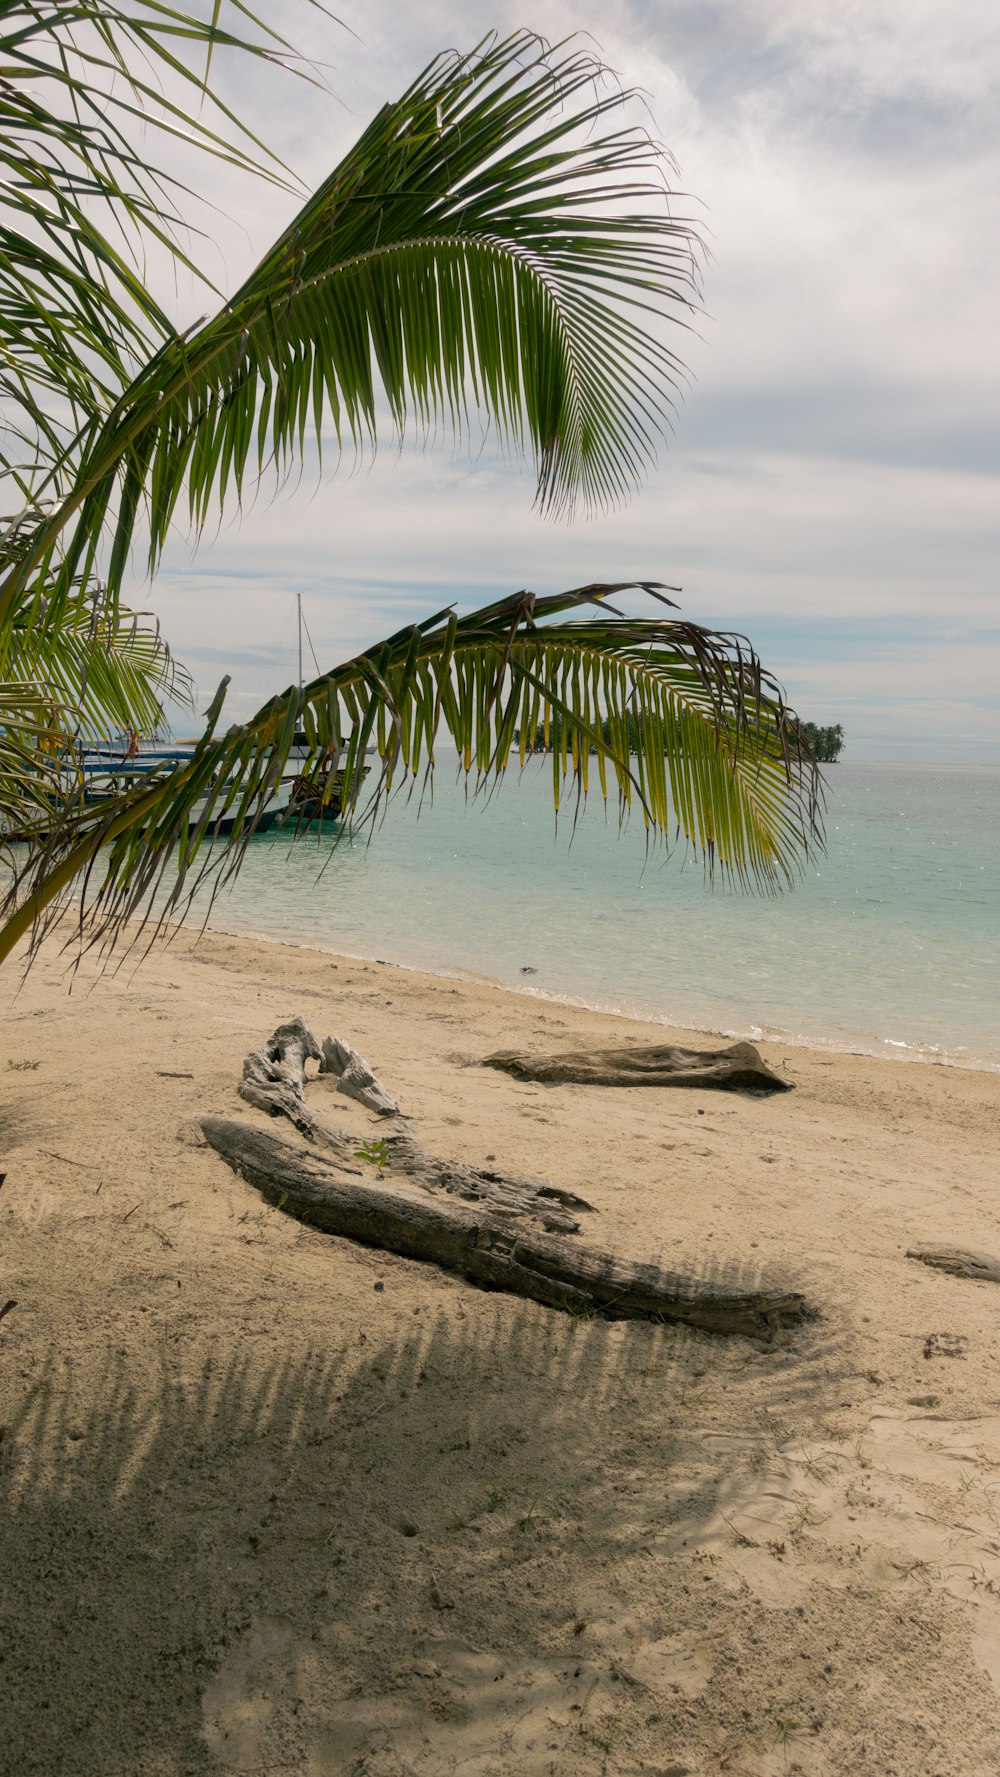 a palm tree on a beach with a boat in the background